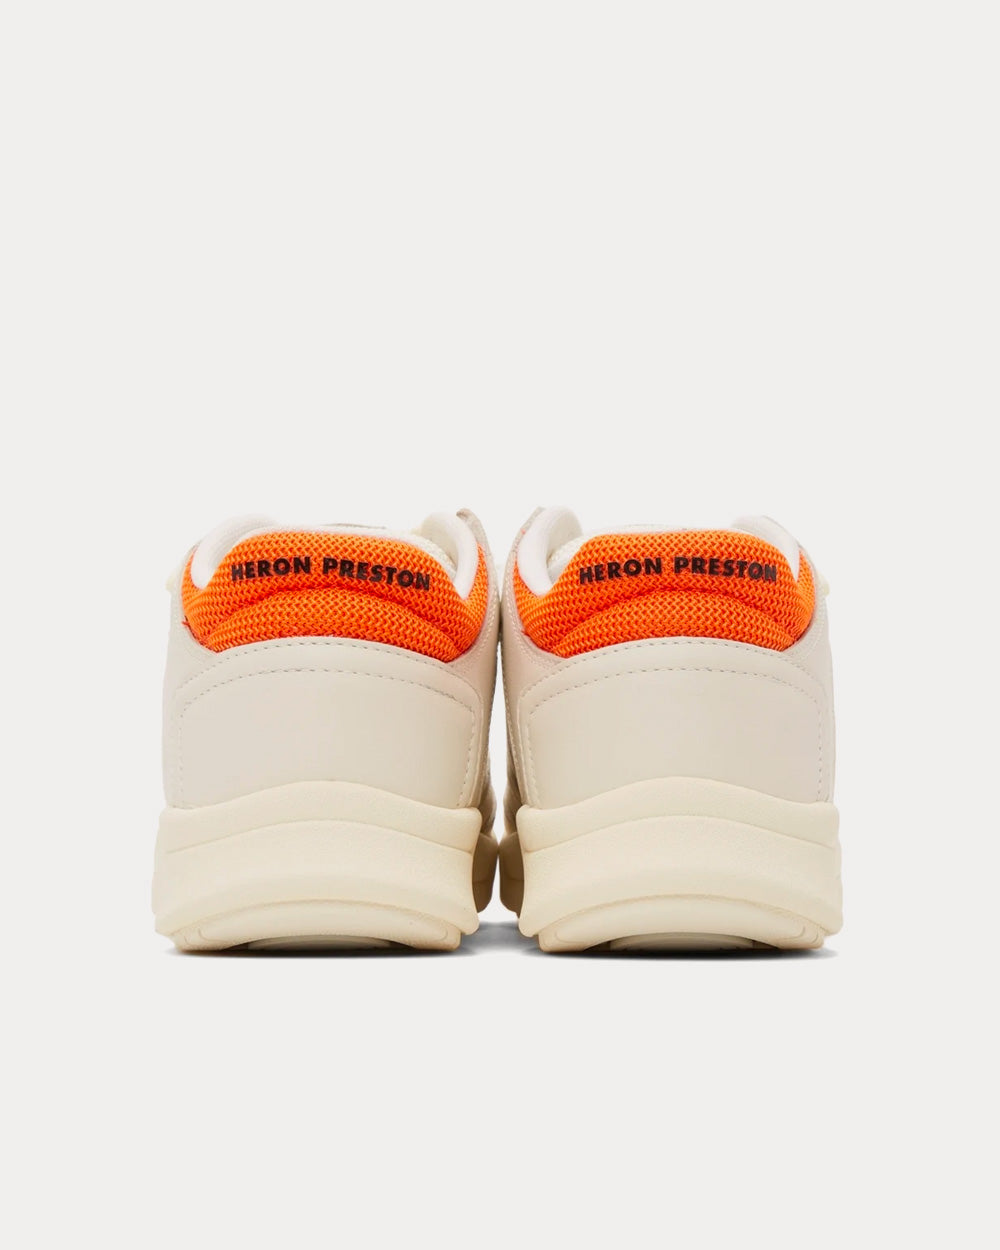 Heron Preston - Lace-Up Leather Off-White / Orange Low Top Sneakers